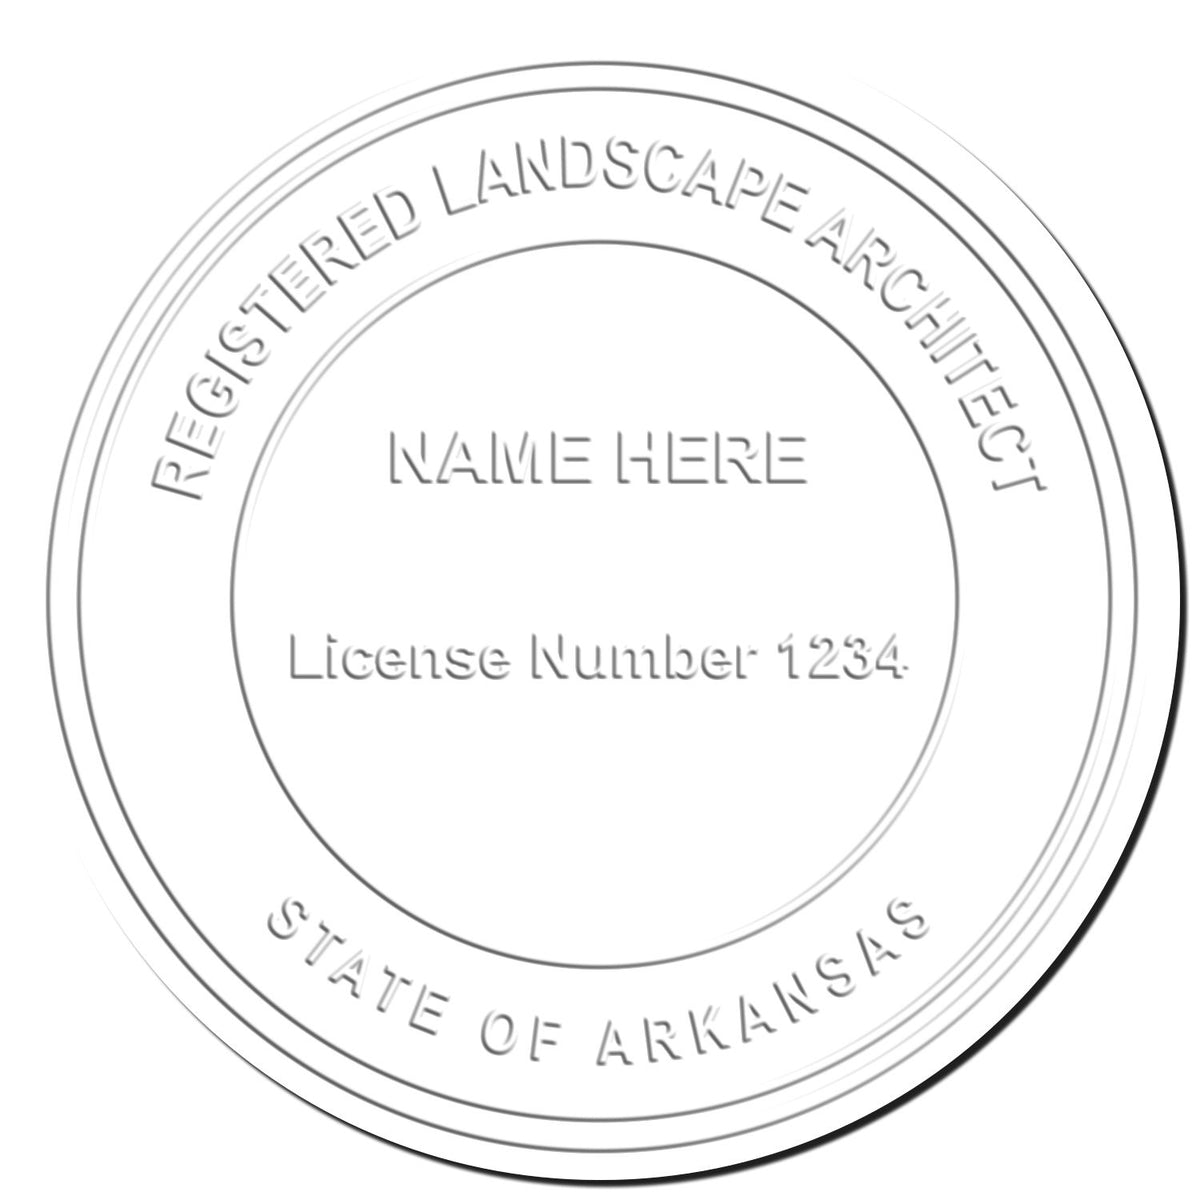 This paper is stamped with a sample imprint of the Gift Arkansas Landscape Architect Seal, signifying its quality and reliability.